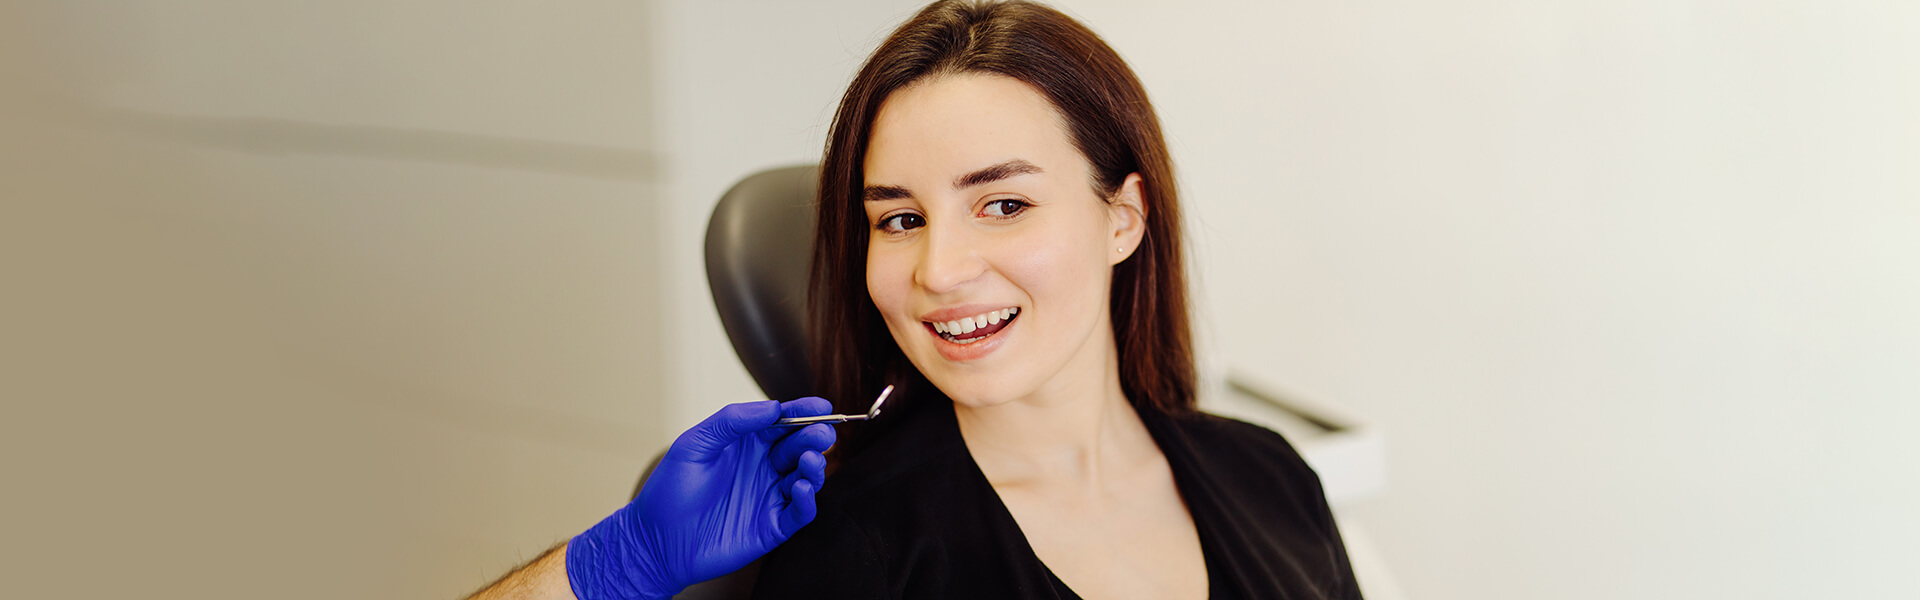 How Long Should the Professional Dental Cleaning Take?